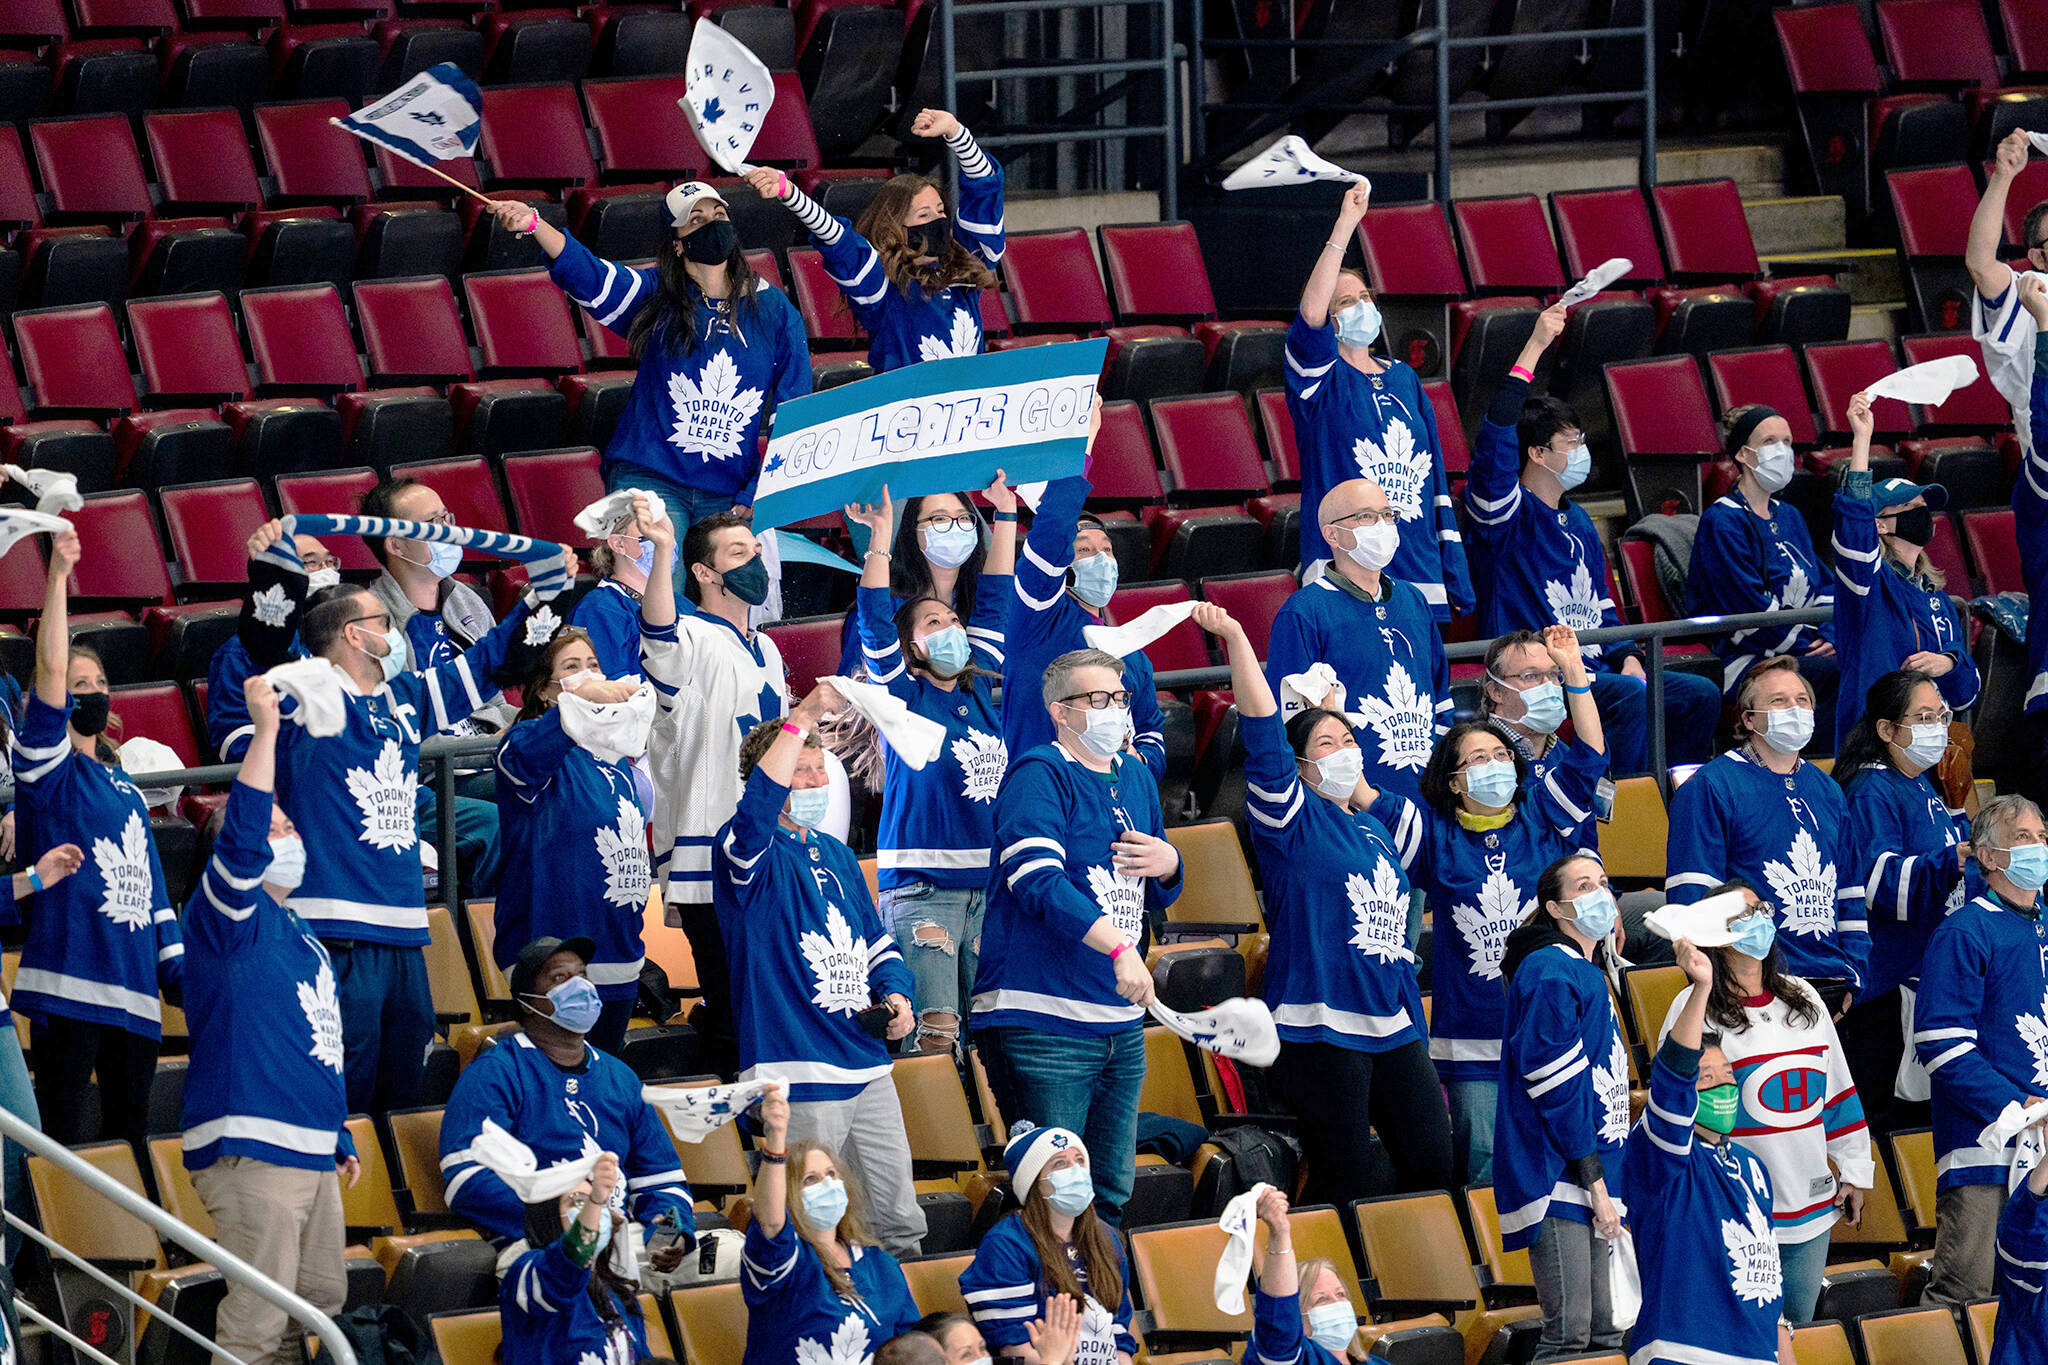 Leafs fans show enthusiasm ahead of Game 5